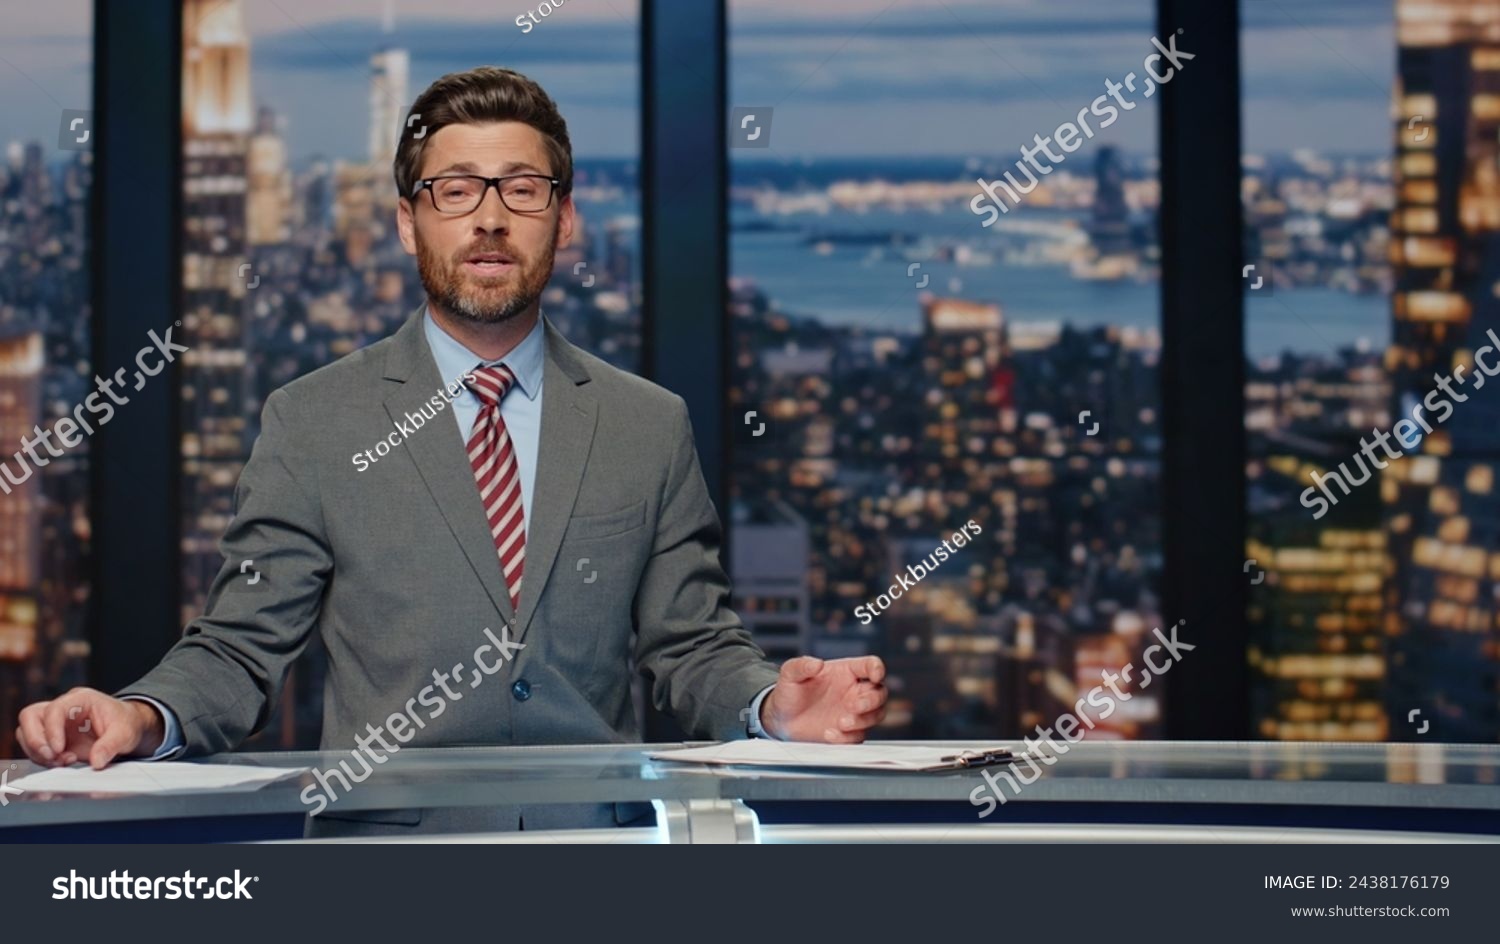 News presenter broadcasting studio. Positive bearded anchor man gesturing hand bringing up important day events. Authority announcer sharing latest evening updates delivering information at work  #2438176179